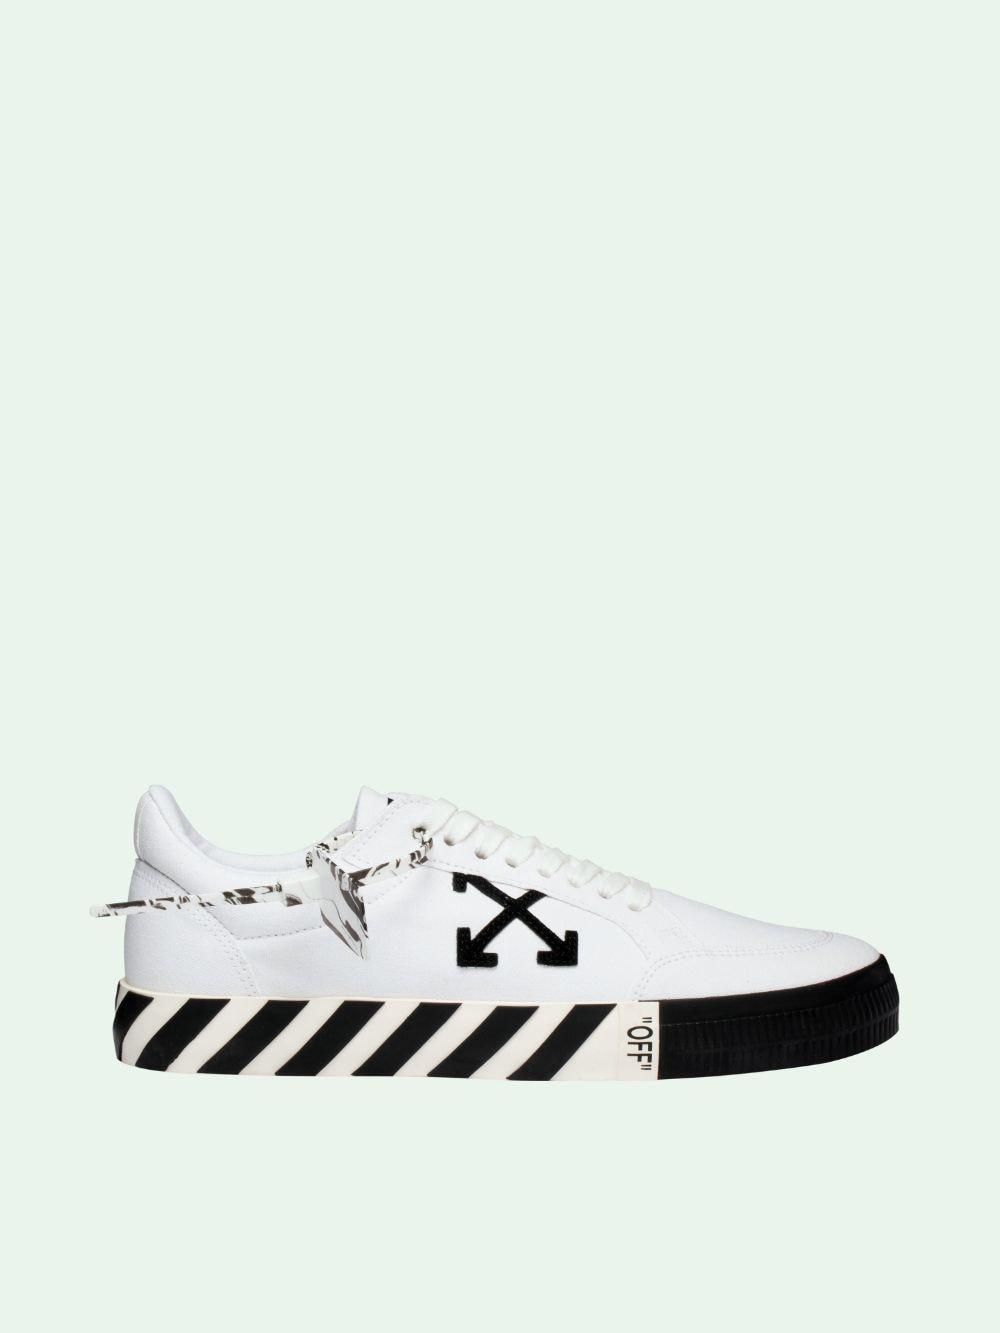 Off-White c/o Virgil Abloh Leather Vulc Striped Low-top Canvas 